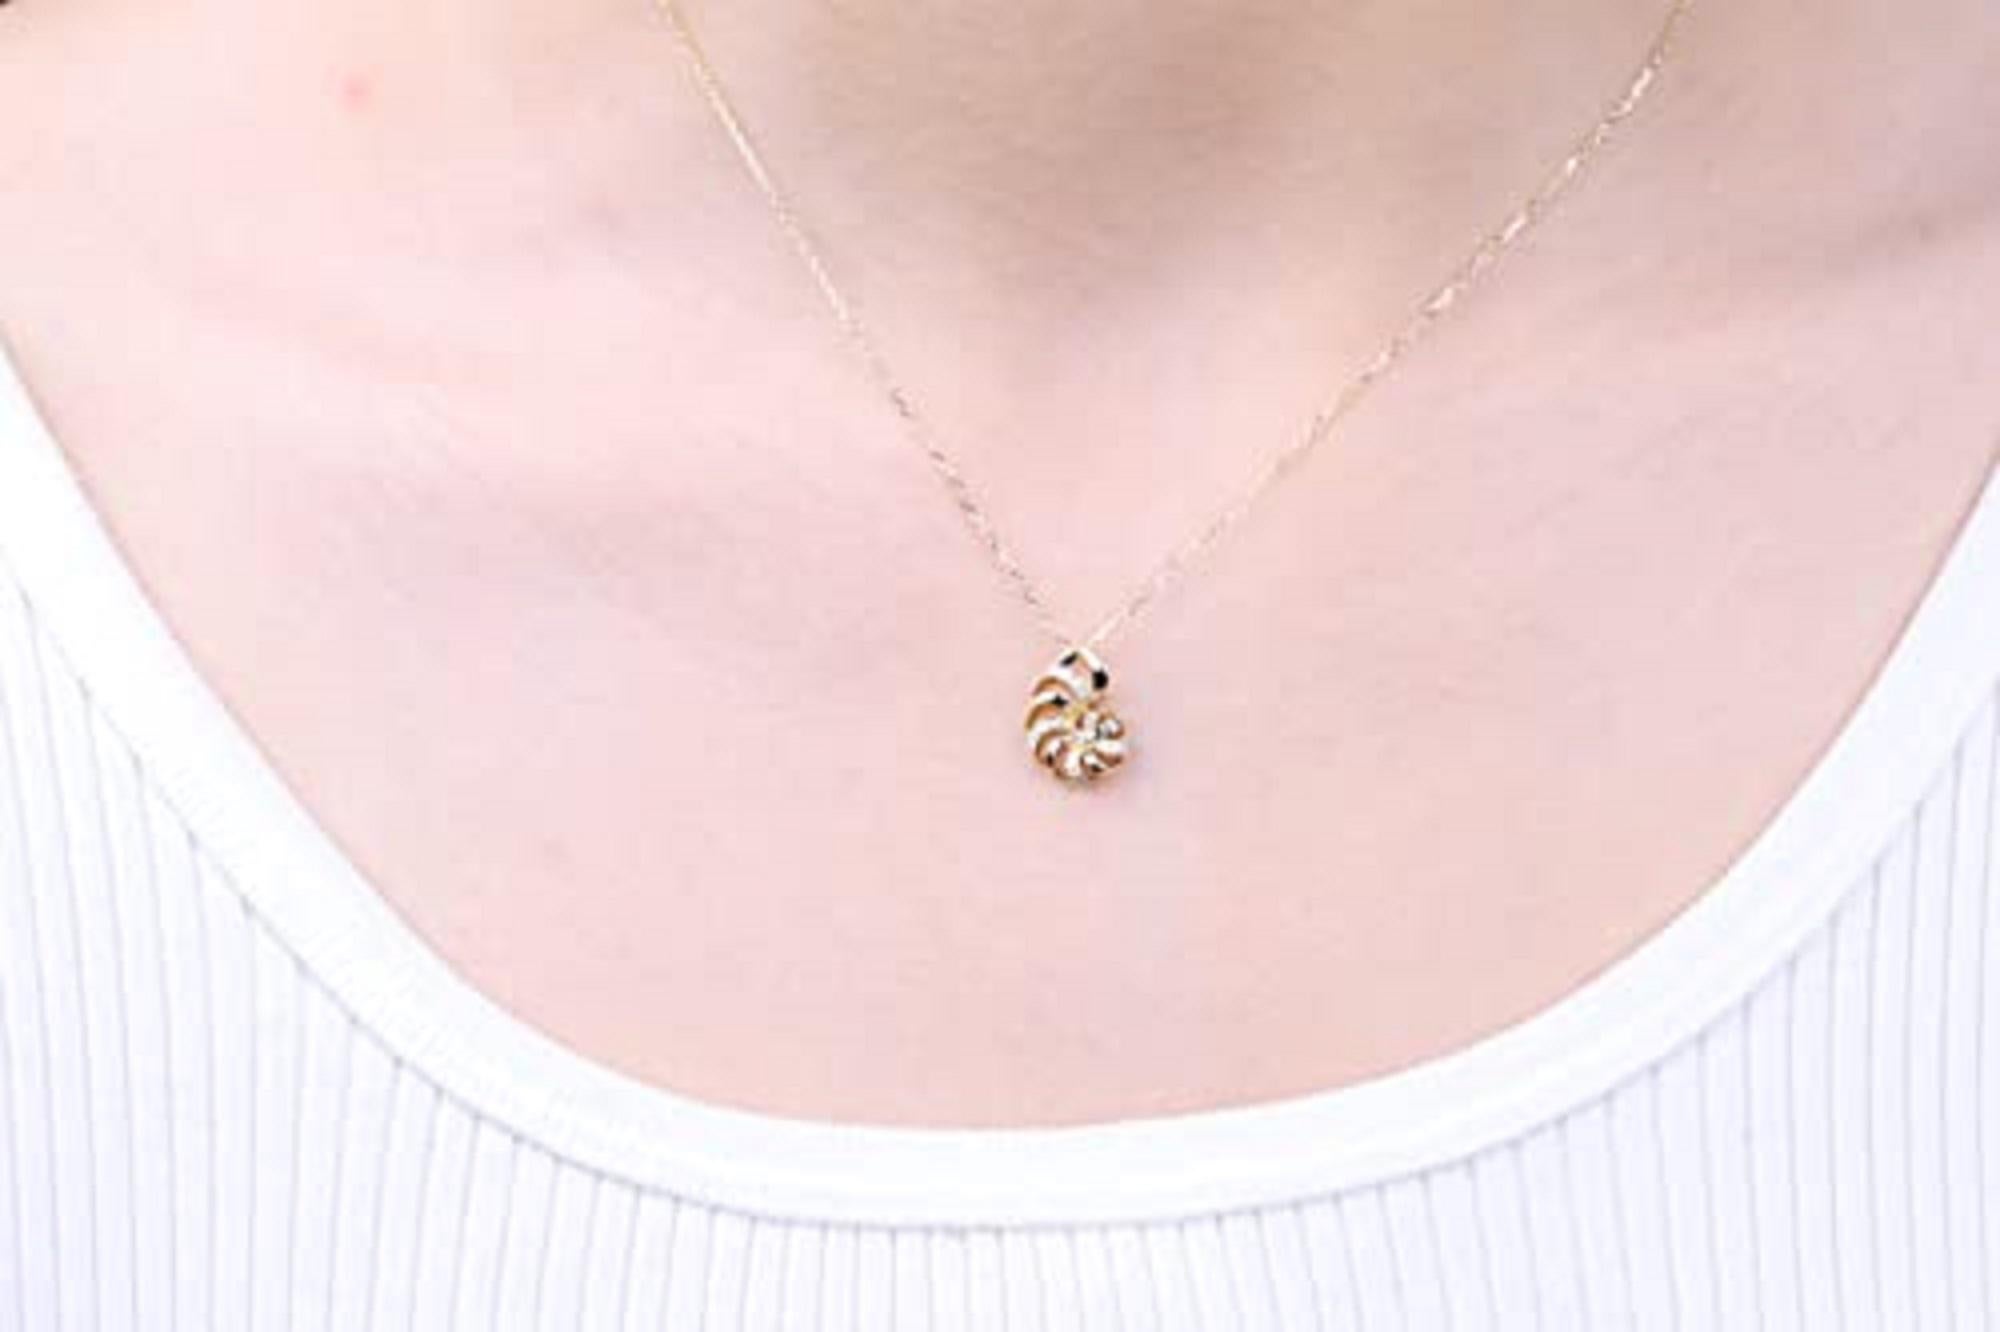 Decorate yourself in elegance with this Pendant is crafted from 14-karat Yellow Gold by Gin & Grace. This Pendant is Round-cut White Diamond (16 Pcs) 0.11 Carat. The pendant is designed by the Smithsonian. This Pendant is weight 1.52 grams and 1.50